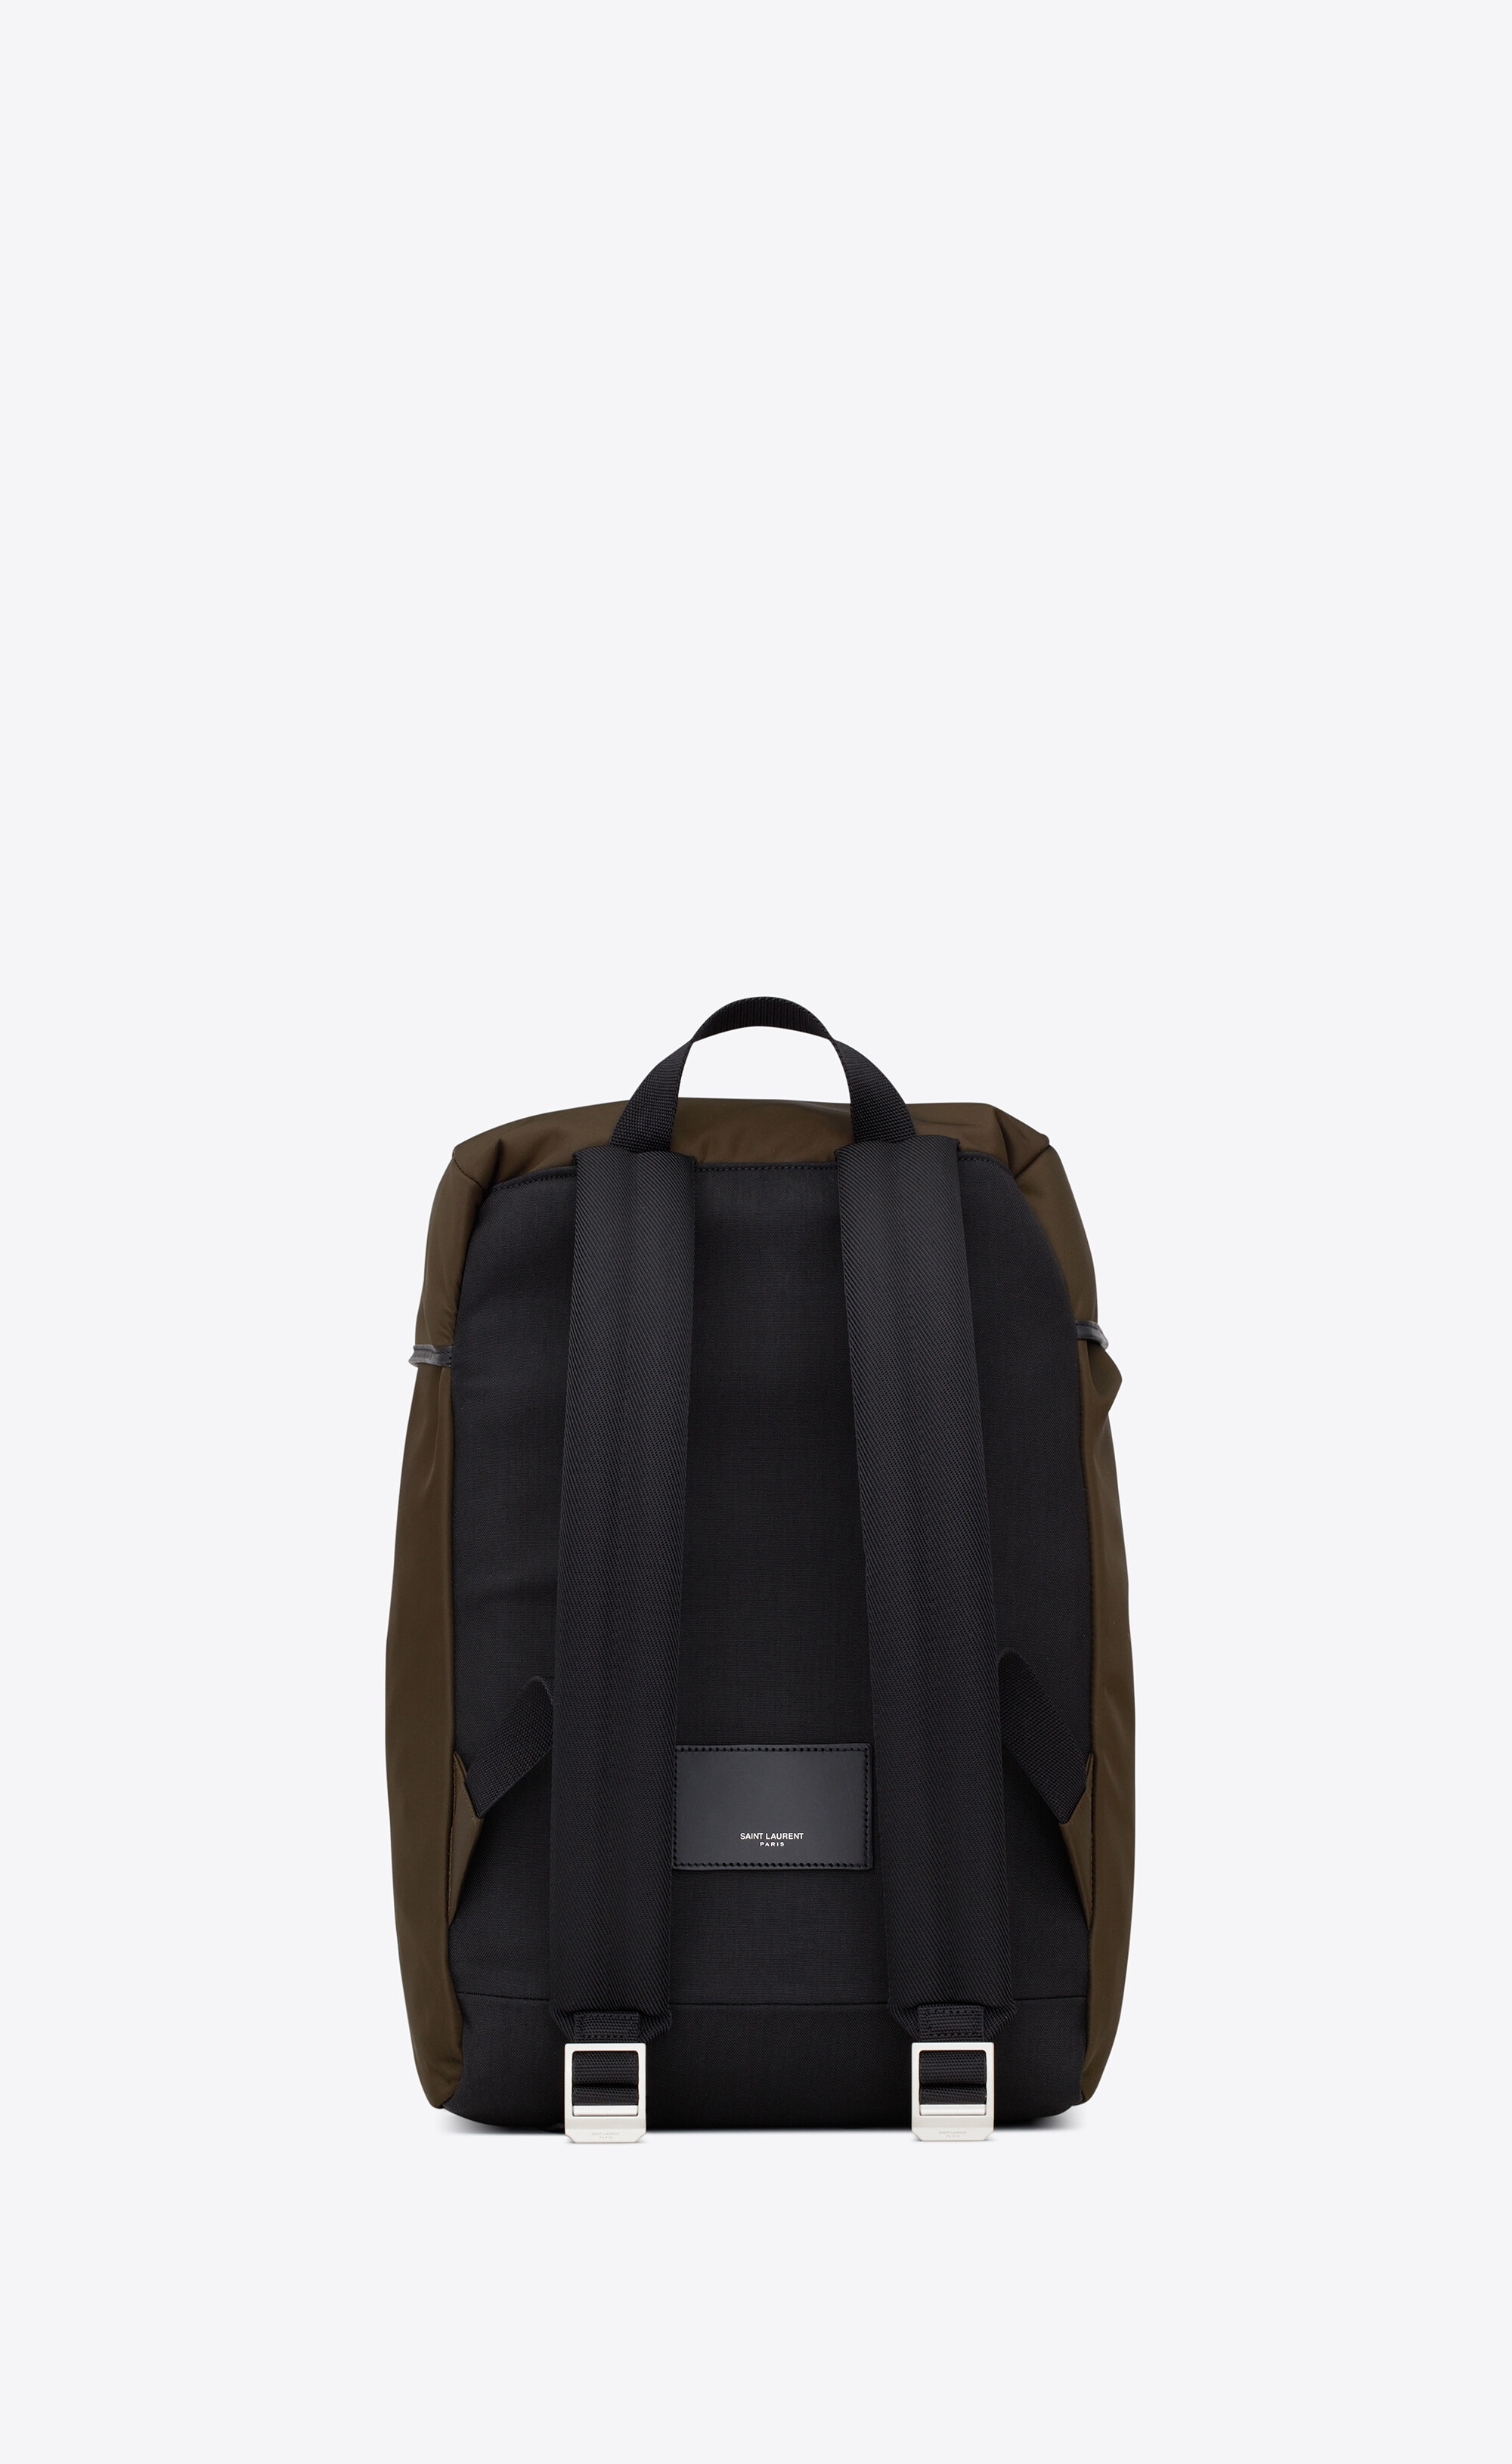 city flap backpack in econyl®, smooth leather and nylon - 2